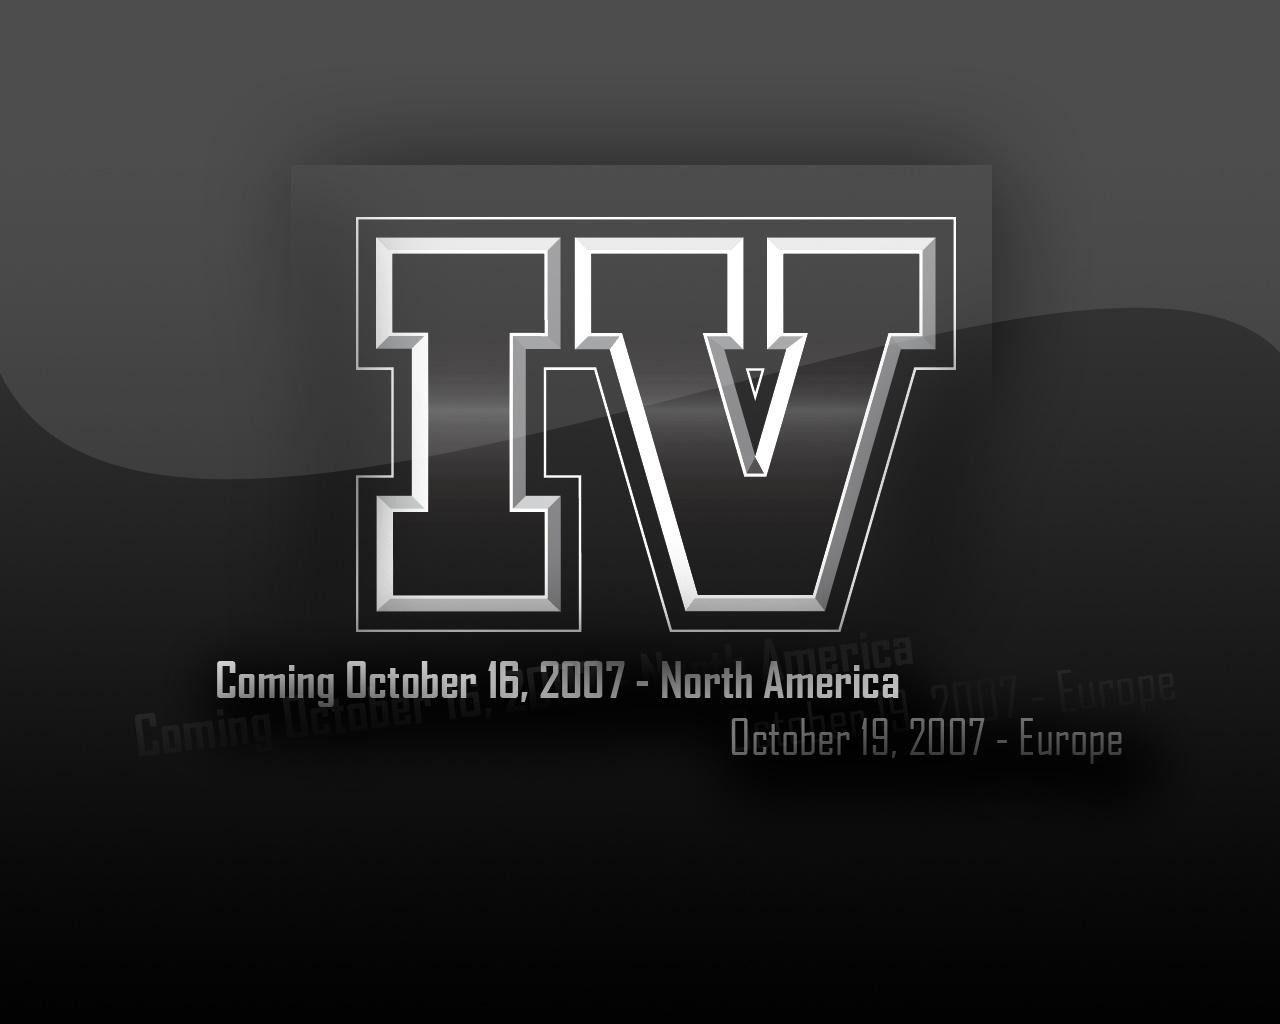 Gta iv wallpaper gta iv games wallpaper for free download about